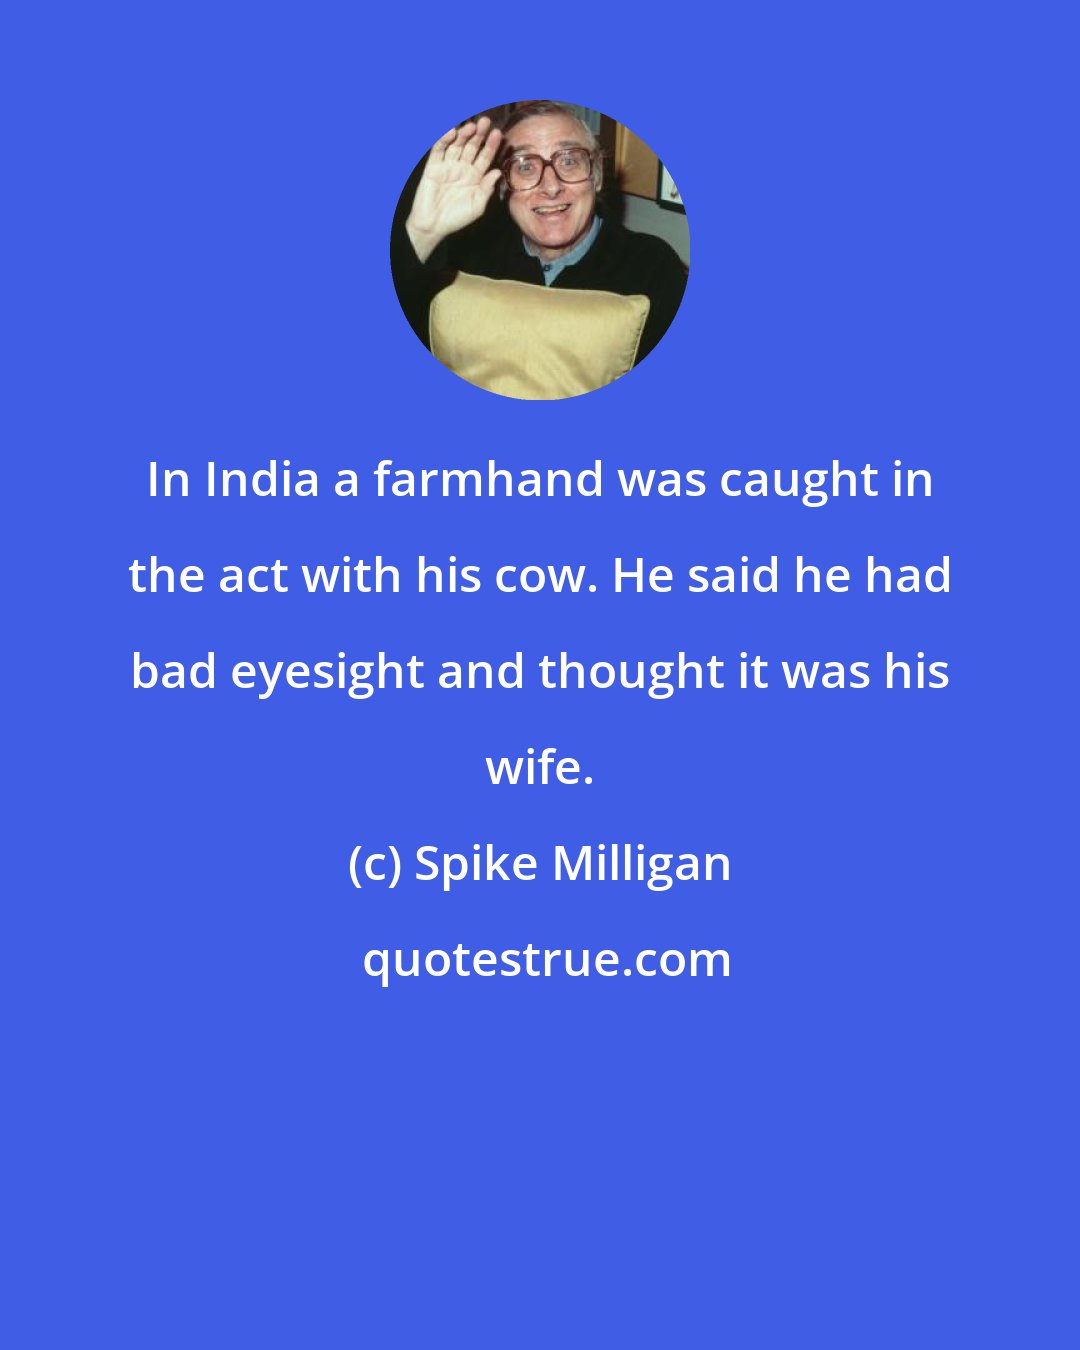 Spike Milligan: In India a farmhand was caught in the act with his cow. He said he had bad eyesight and thought it was his wife.